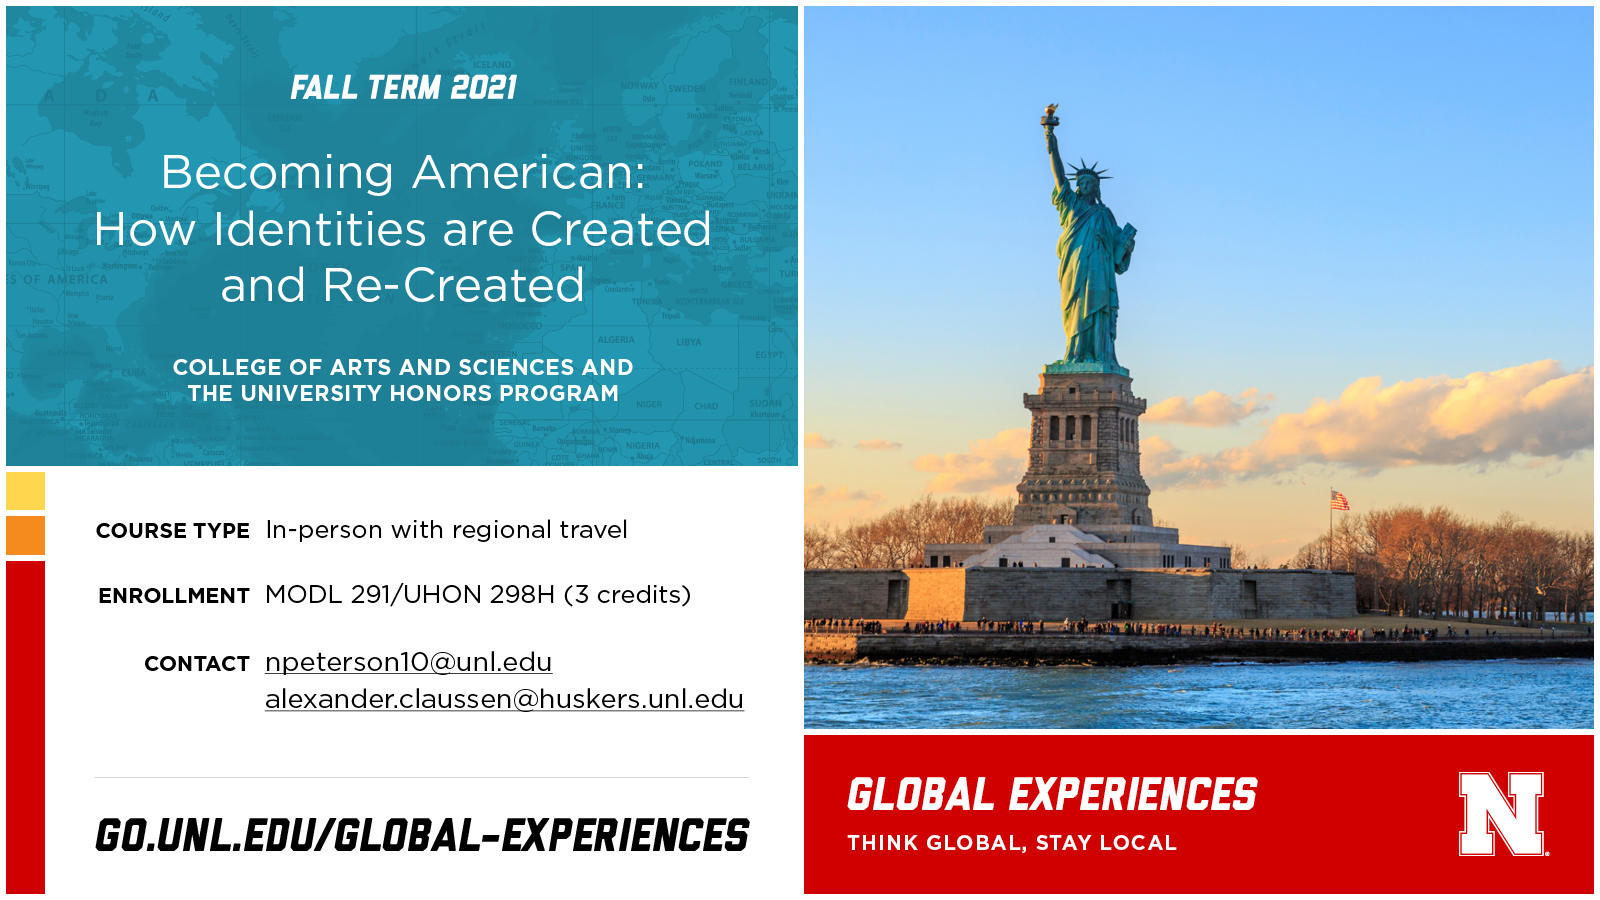 Fall Global Experience: "Becoming American"